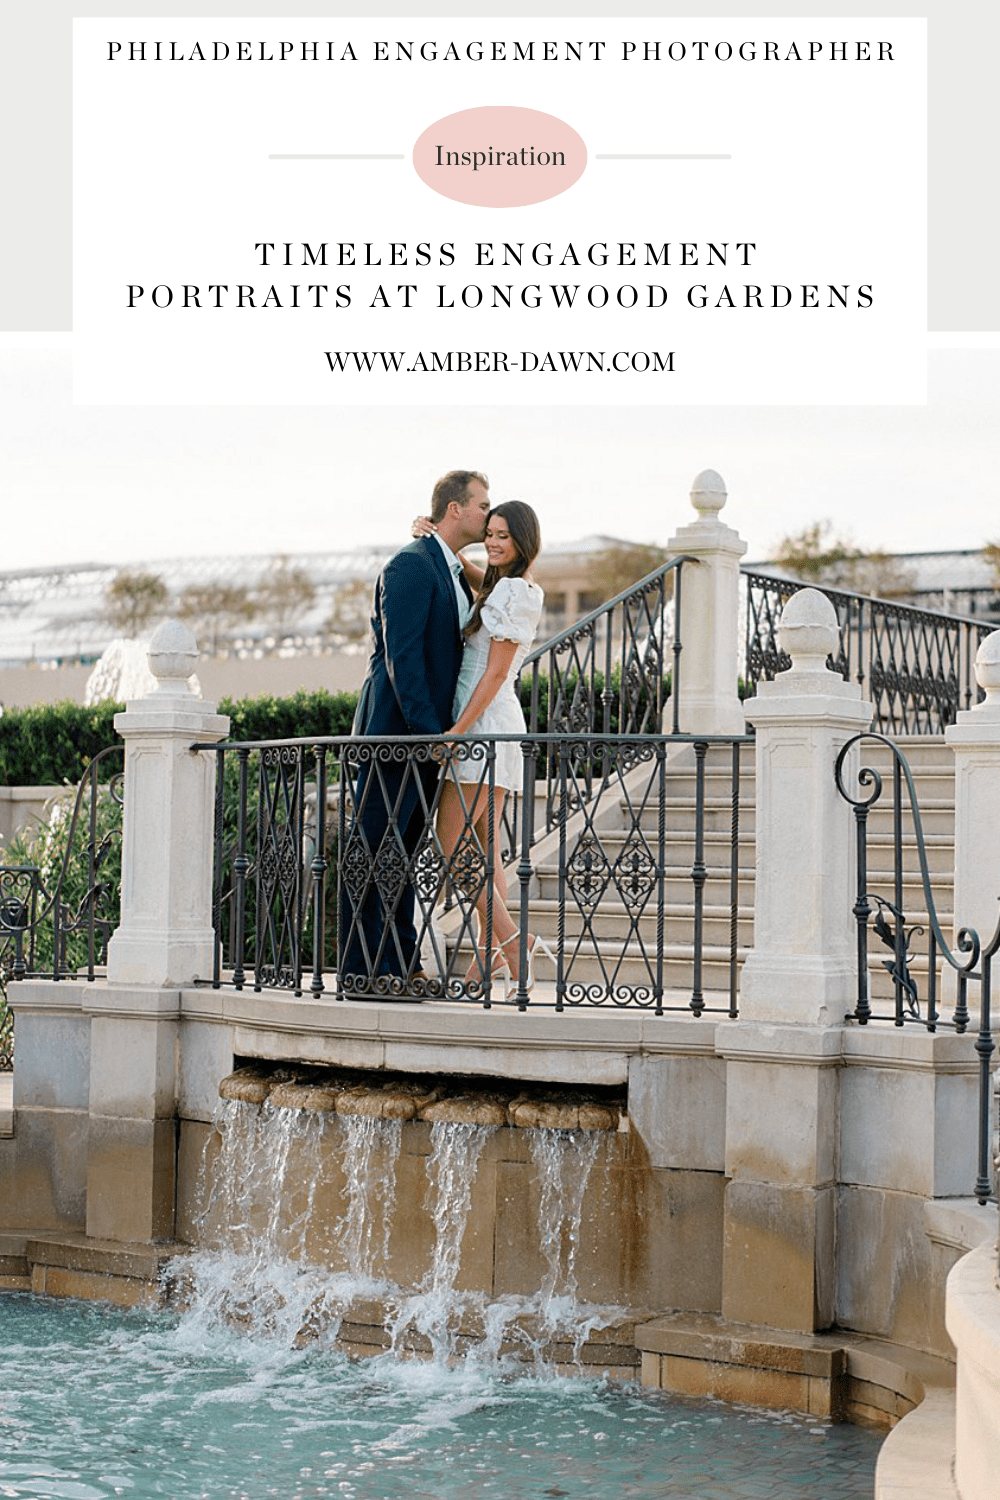 Timeless Engagement portraits at Longwood Gardens by Philadelphia Engagement Photographer, Amber Dawn Photography